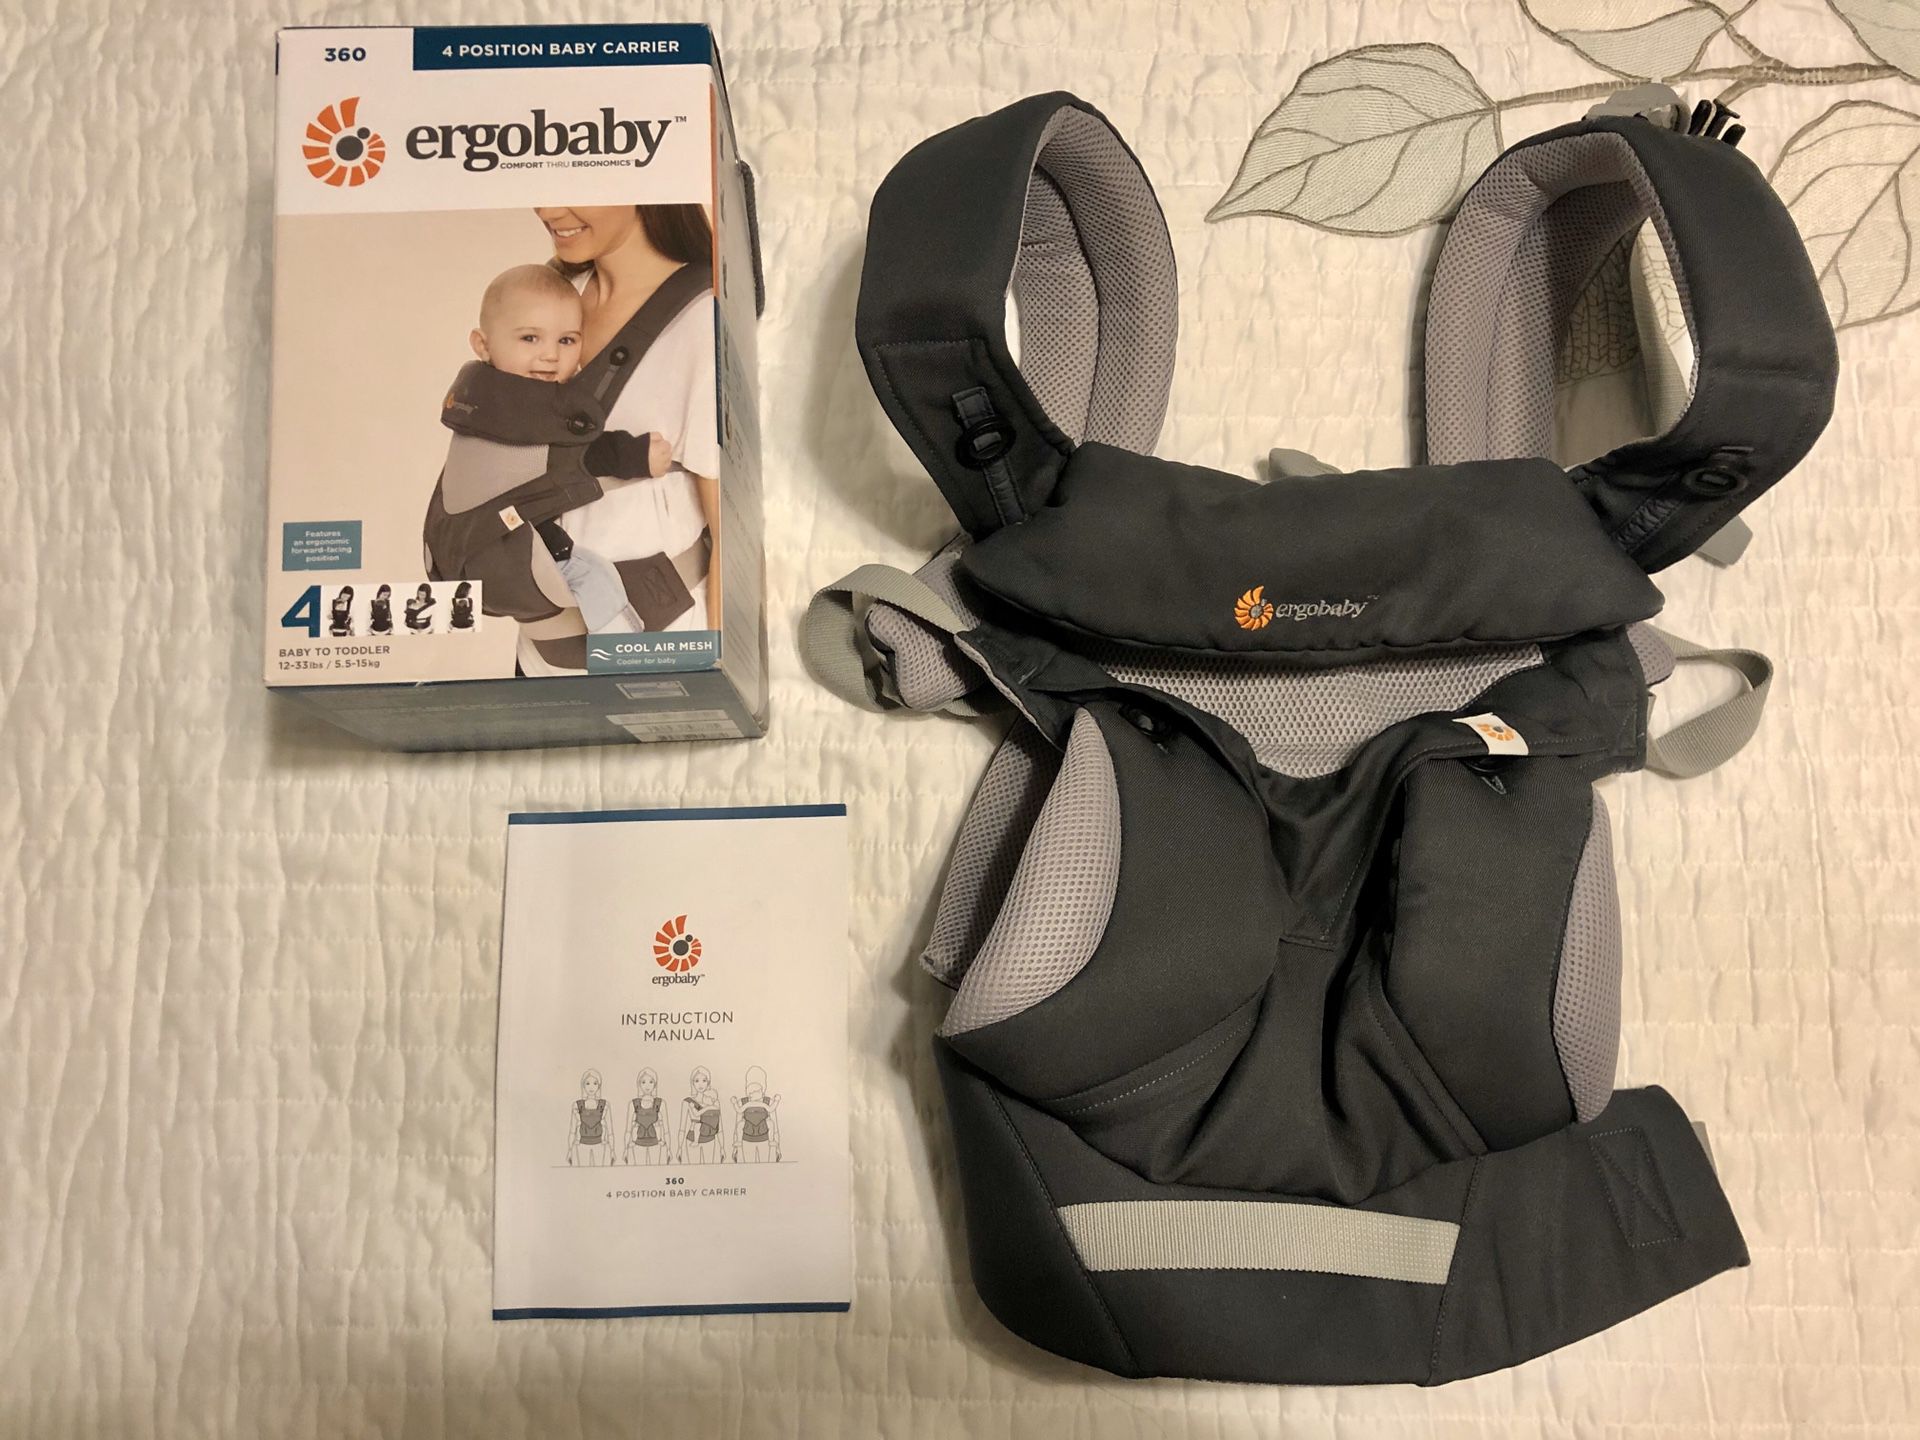 Ergo baby carrier-Excellent condition!